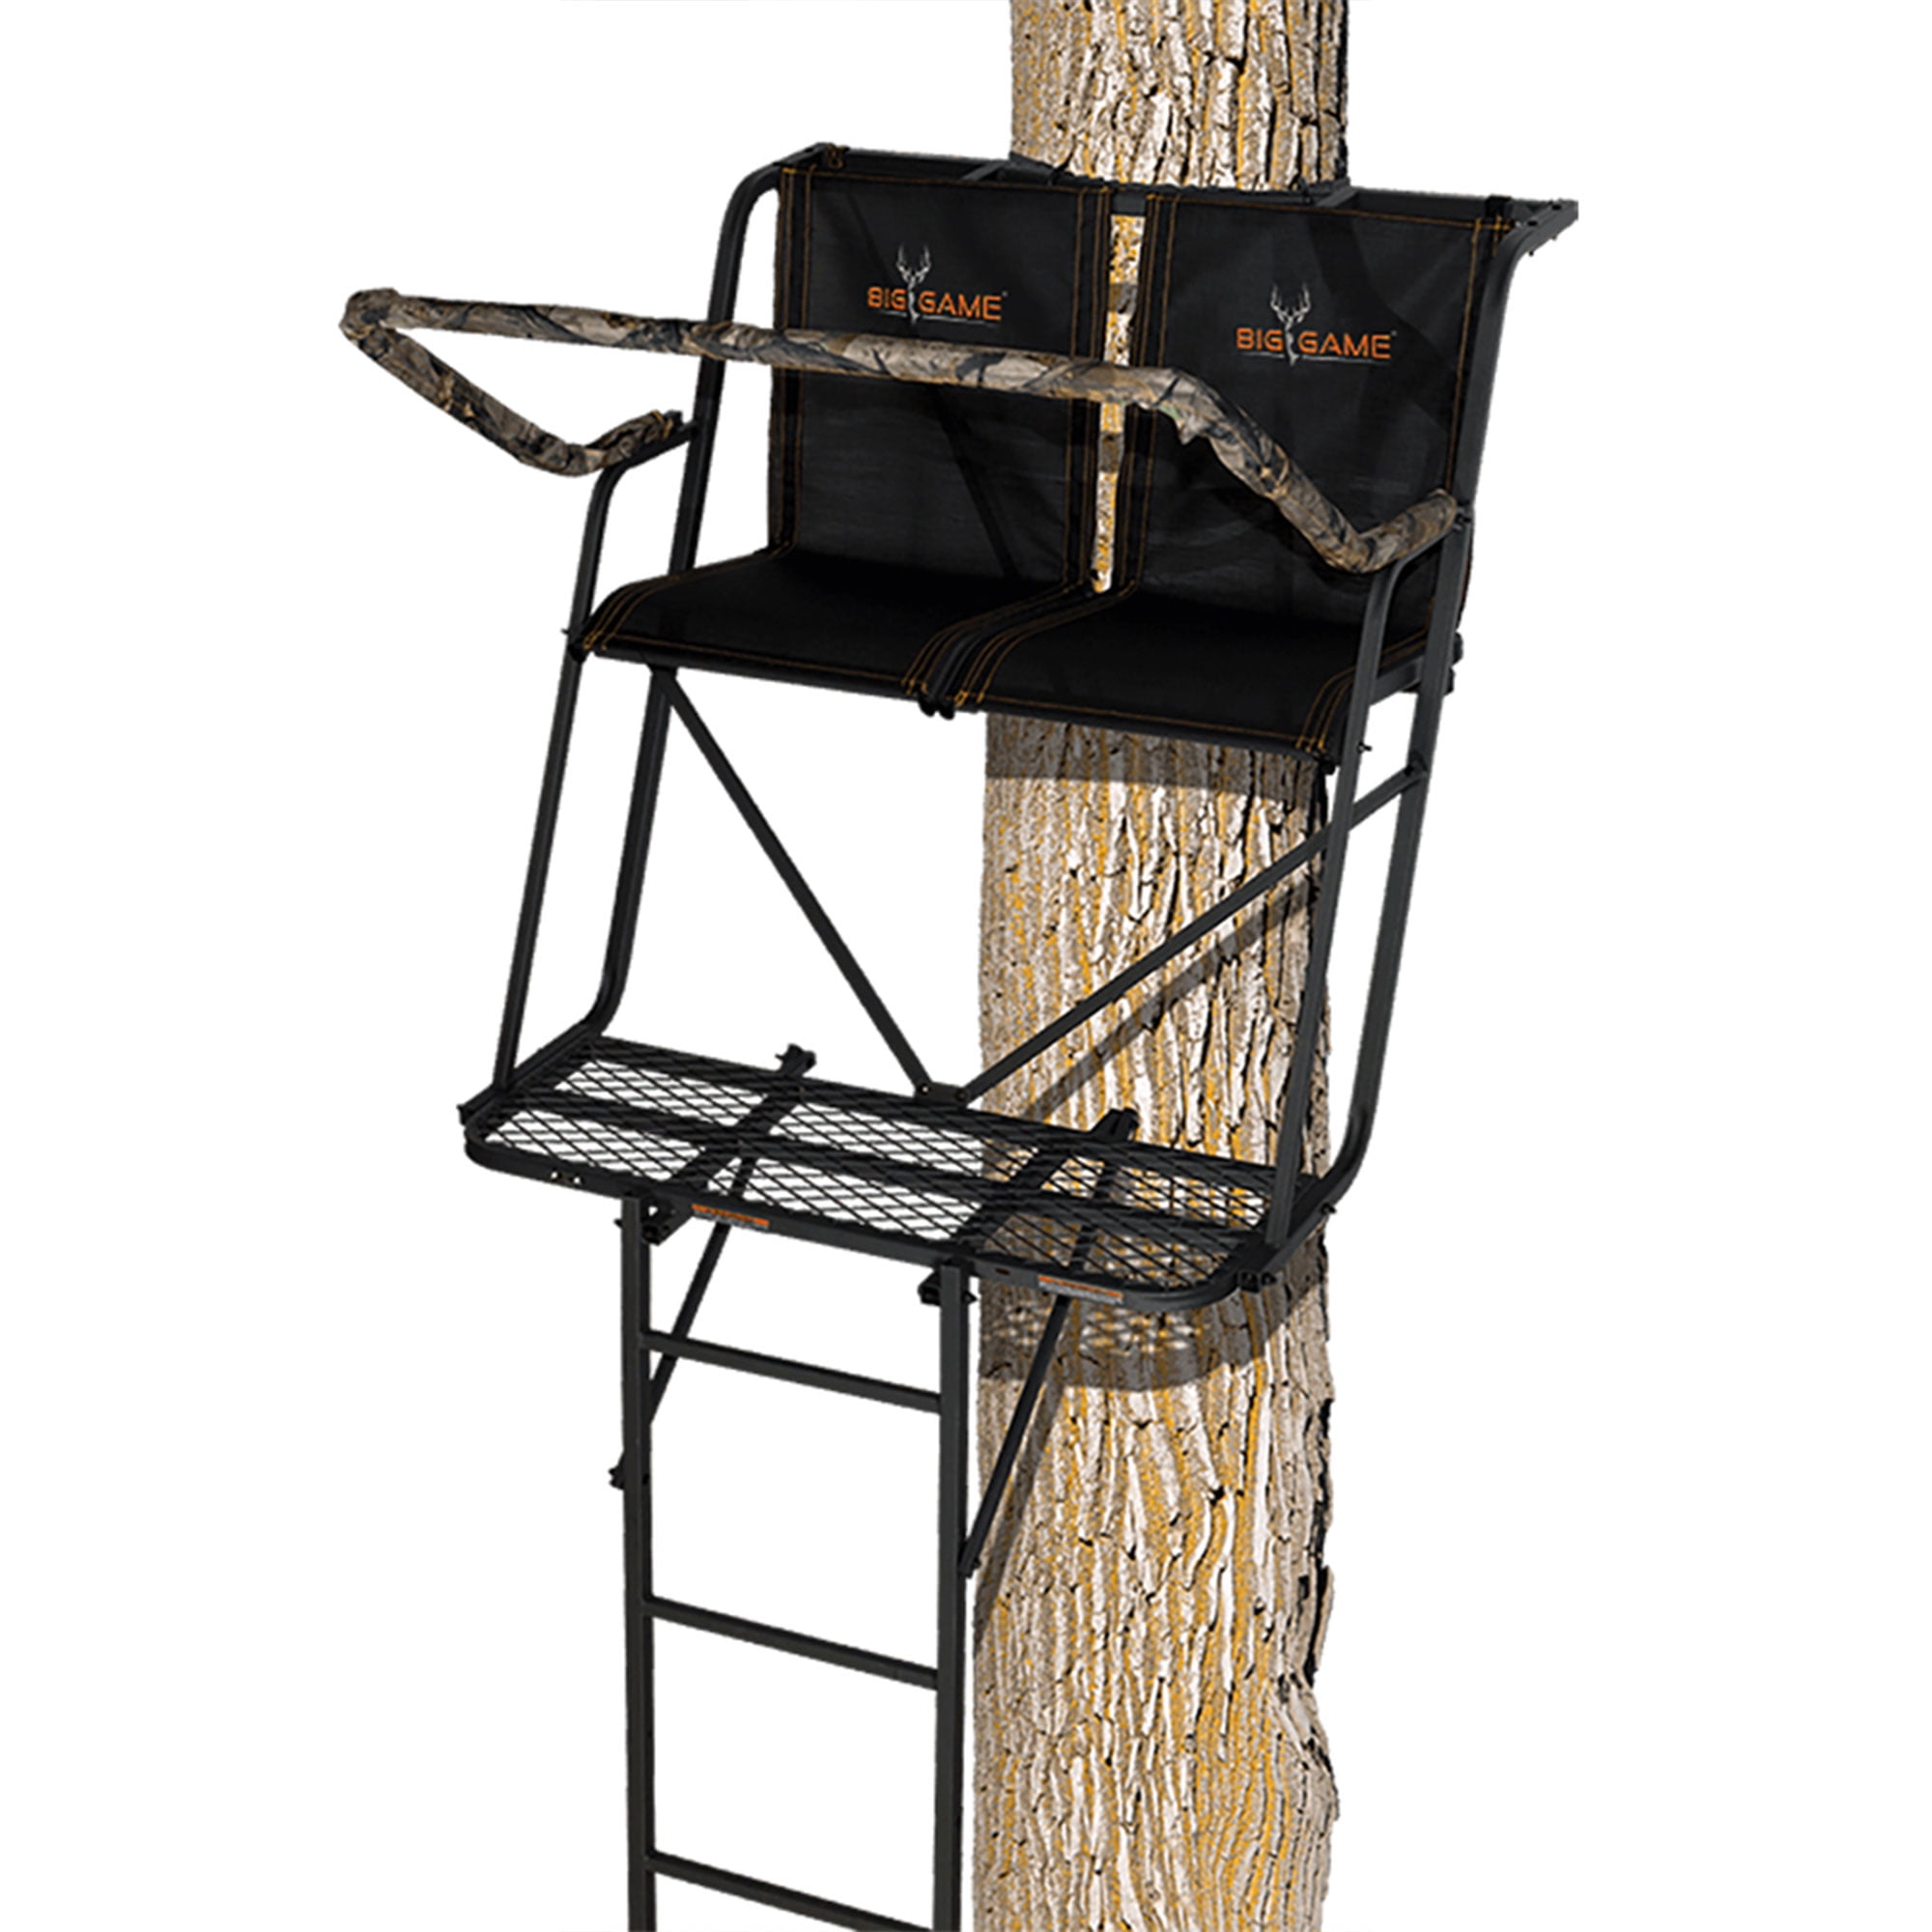 Ladder Tree Stand 2 Man 15' Archery Hunting Camping Shooting Safety Harness New 